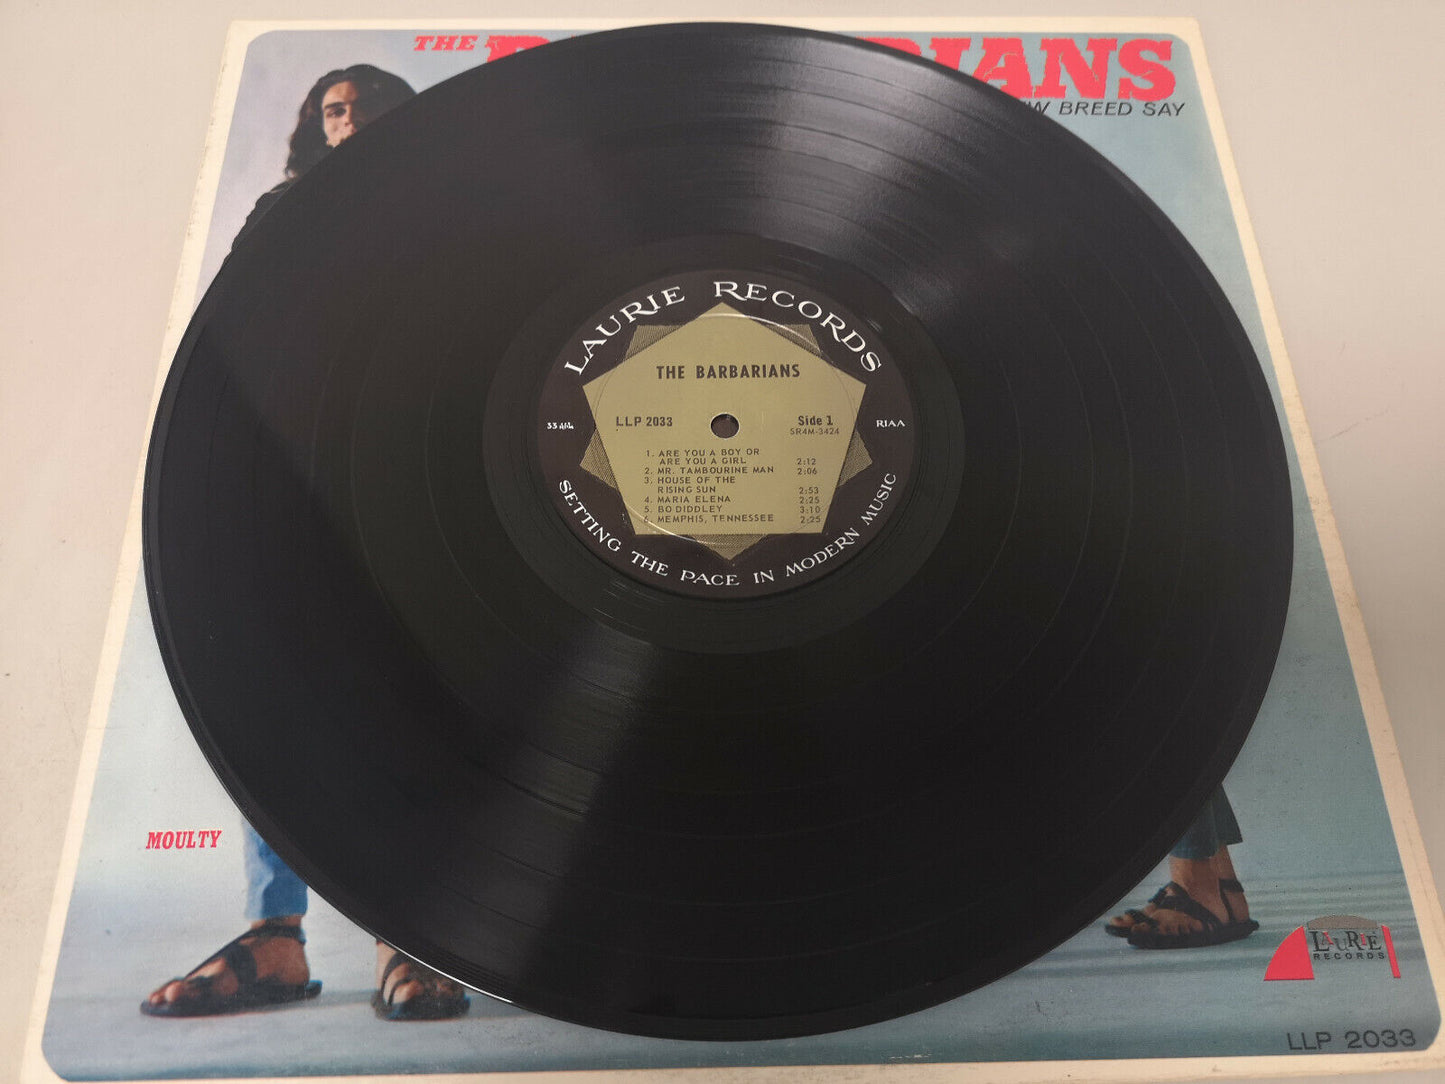 Barbarians "Are you a Boy or are you a Girl" Orig US 1966 Mono VG++/EX